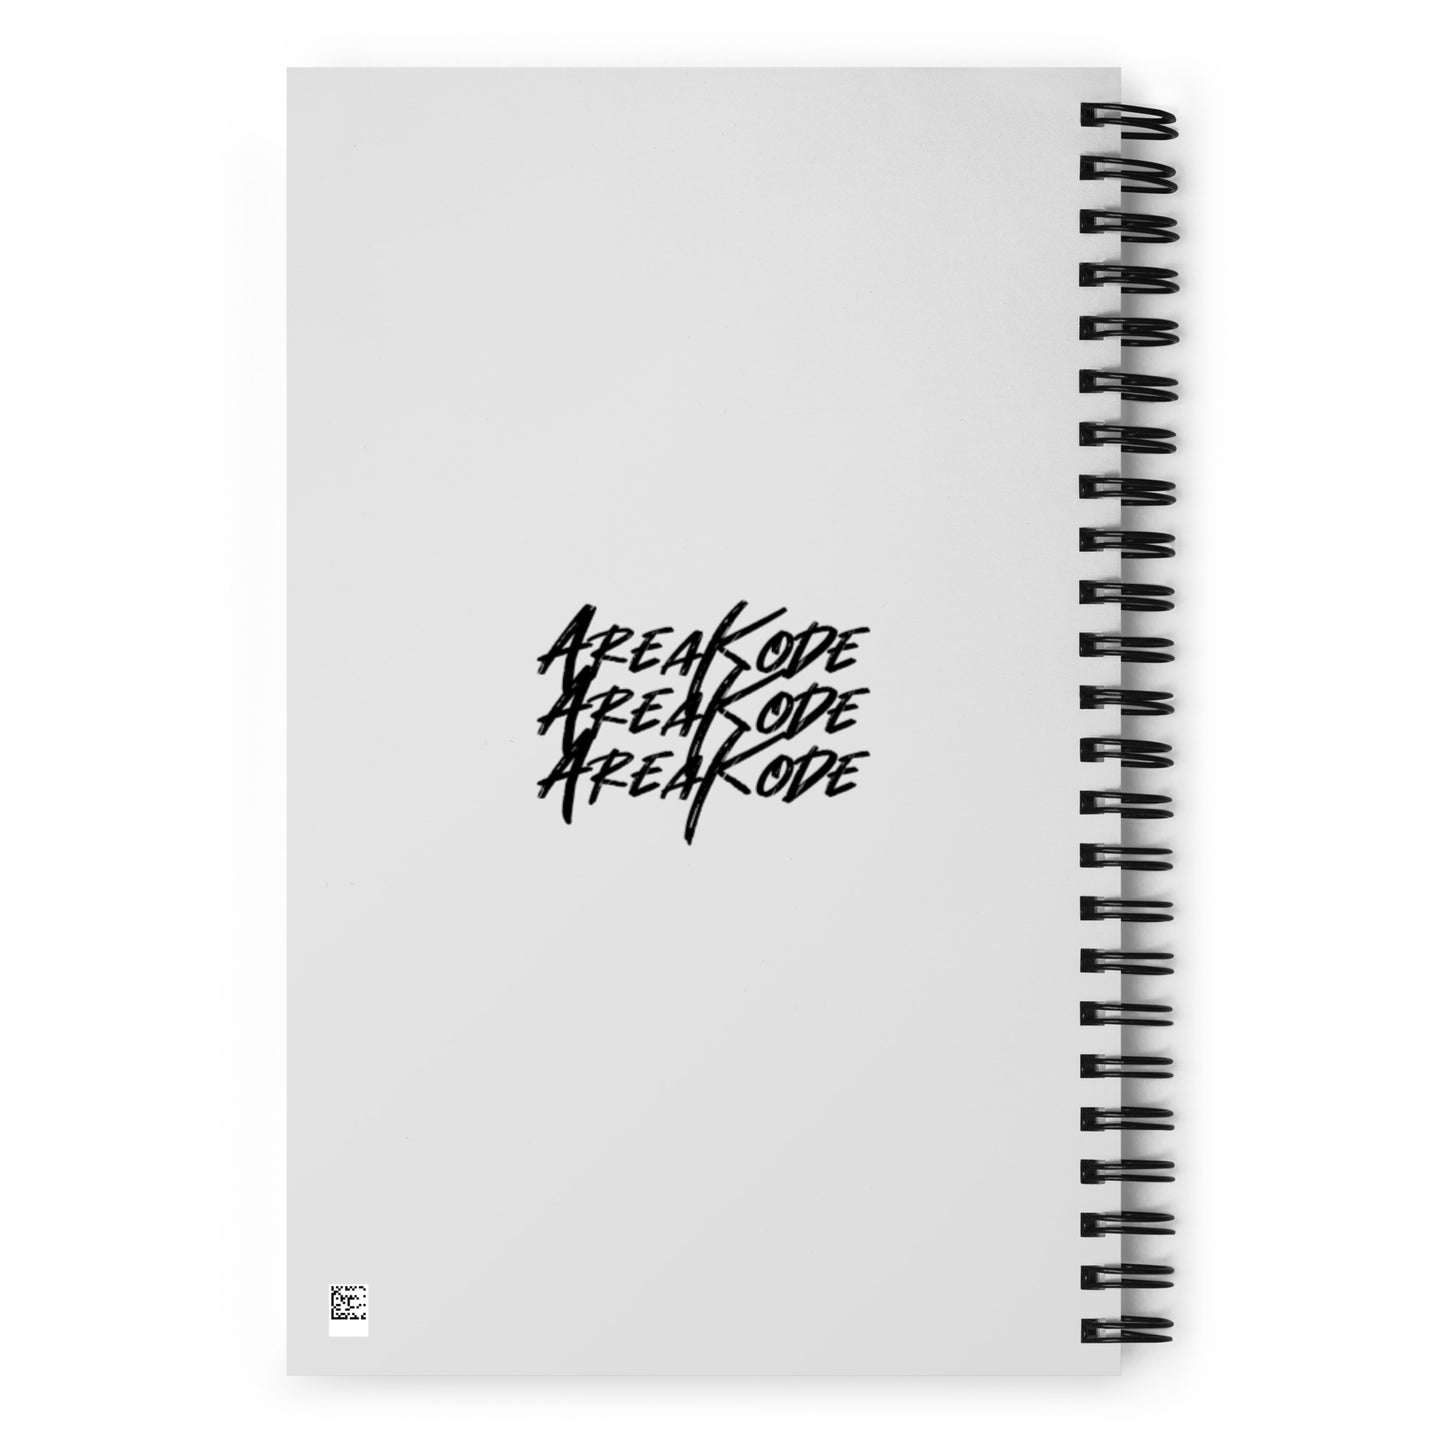 Los Angeles Map Spiral notebook